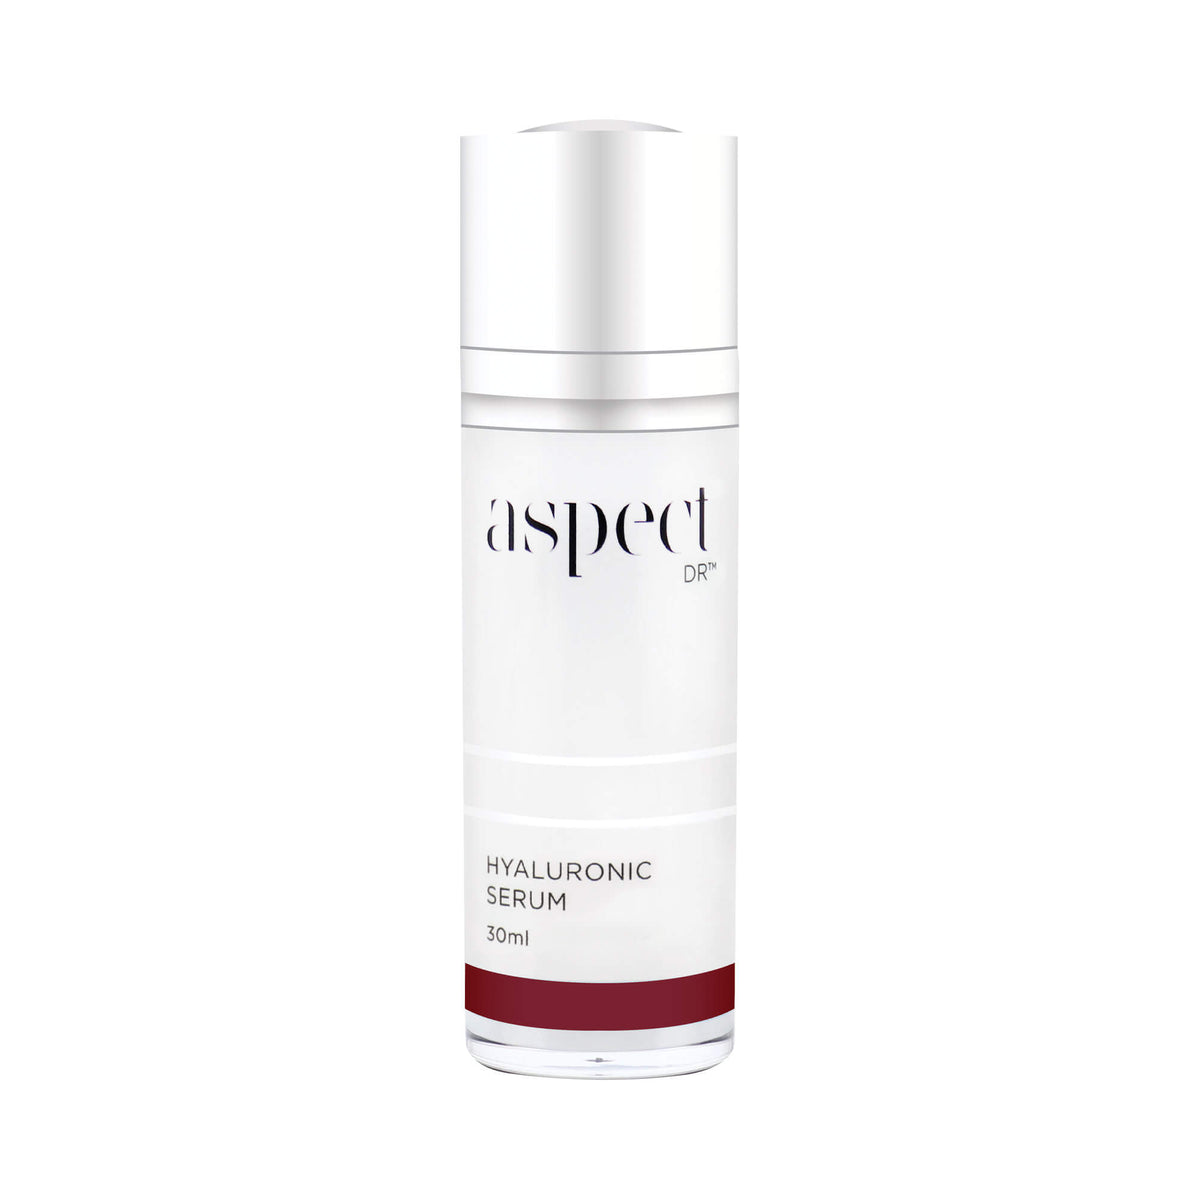 ASPECT DR Hyaluronic Serum 30ml - Exquisite Laser Clinic 